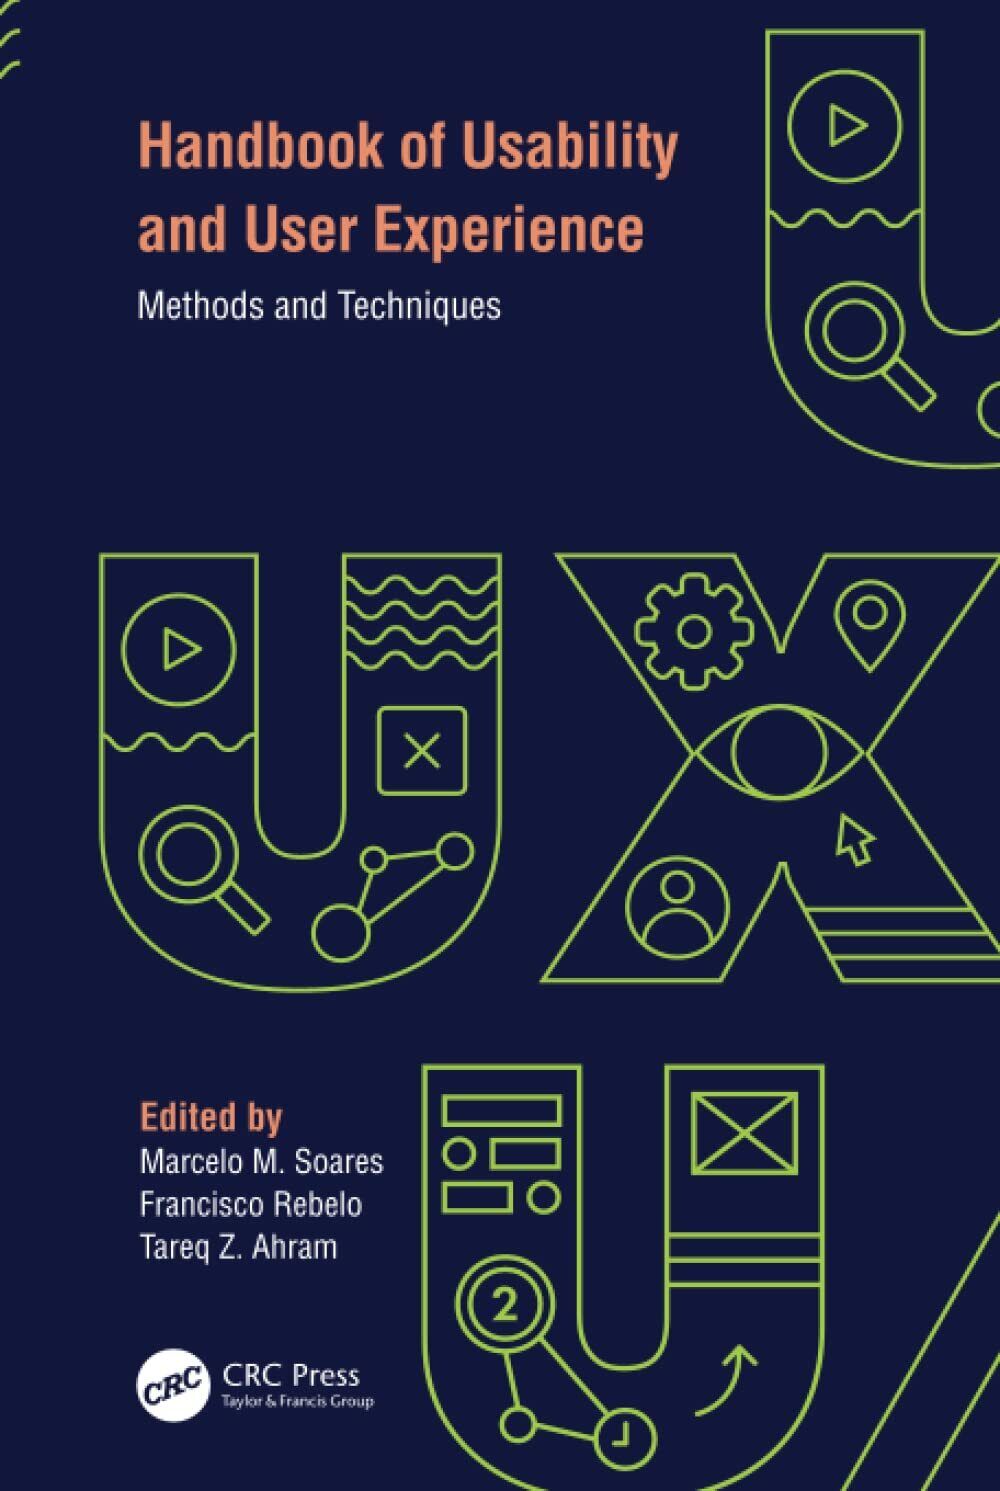 Handbook of Usability and User-Experience - Marcelo M. Soares - CRC Press, 2022